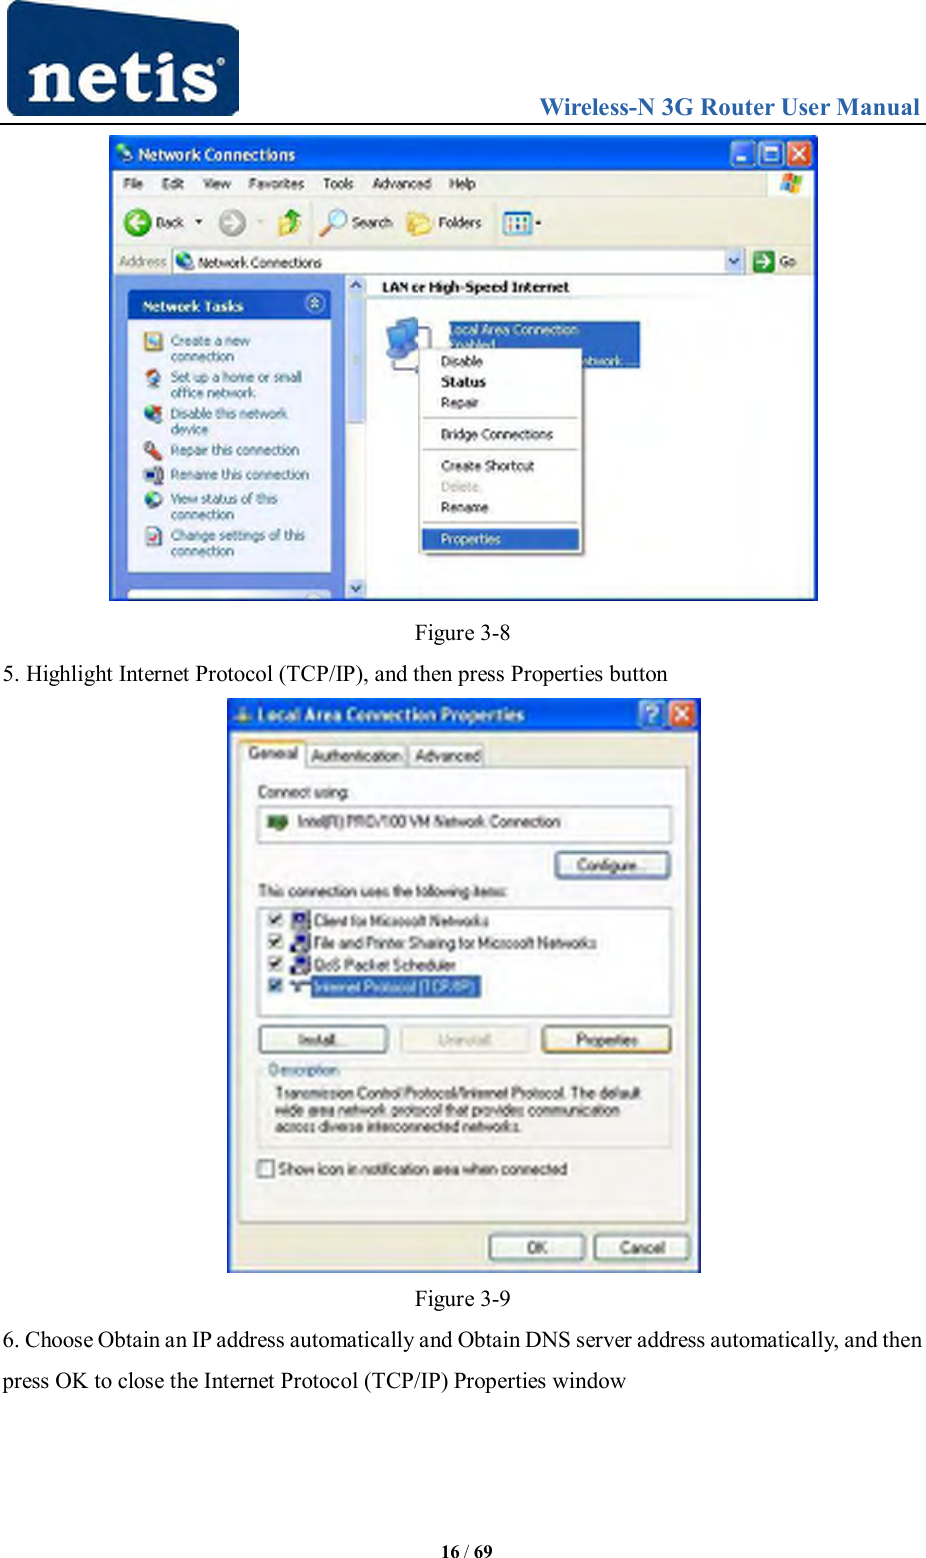                                 Wireless-N 3G Router User Manual  16 / 69  Figure 3-8 5. Highlight Internet Protocol (TCP/IP), and then press Properties button  Figure 3-9 6. Choose Obtain an IP address automatically and Obtain DNS server address automatically, and then press OK to close the Internet Protocol (TCP/IP) Properties window 